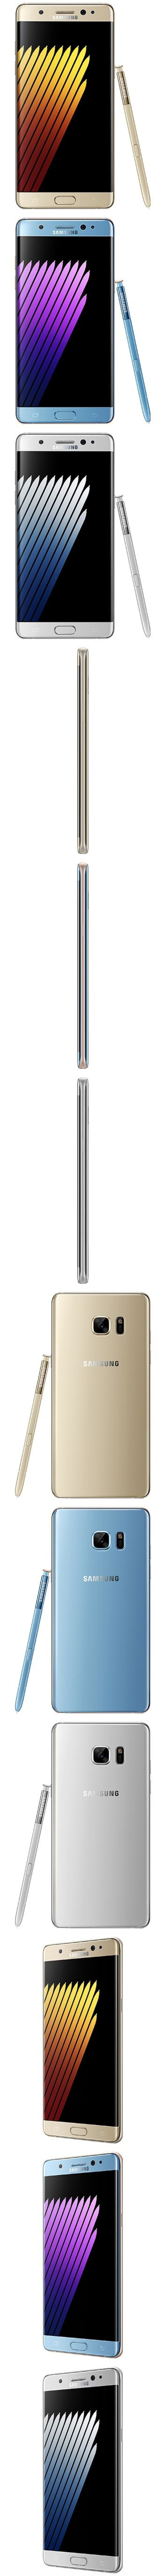 Samsung Galaxy Note 7 color options